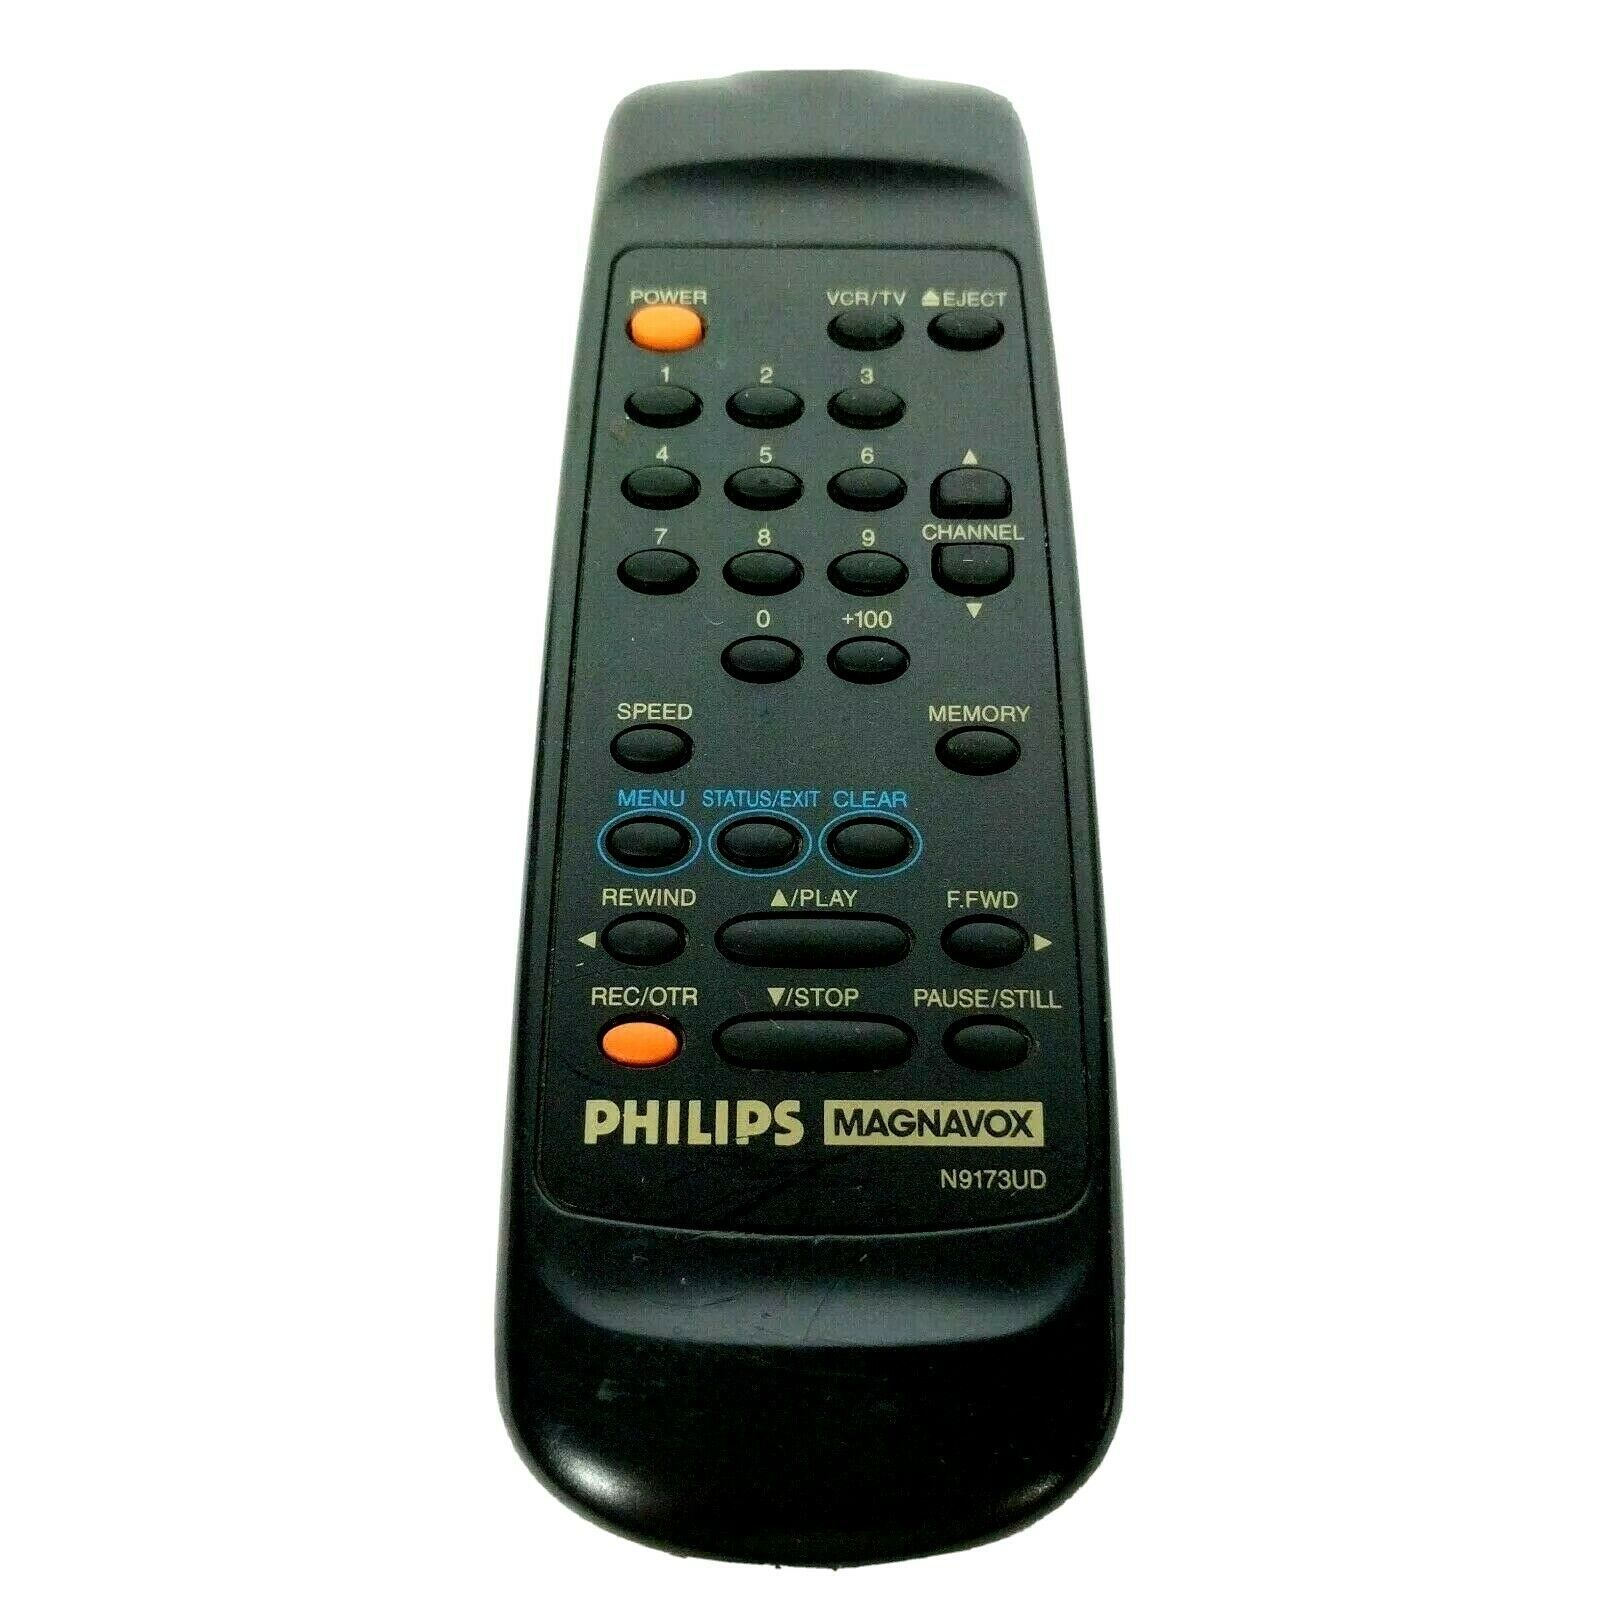 Primary image for Genuine Philips Magnavox TV VCR Remote Control N9173UD Tested Works